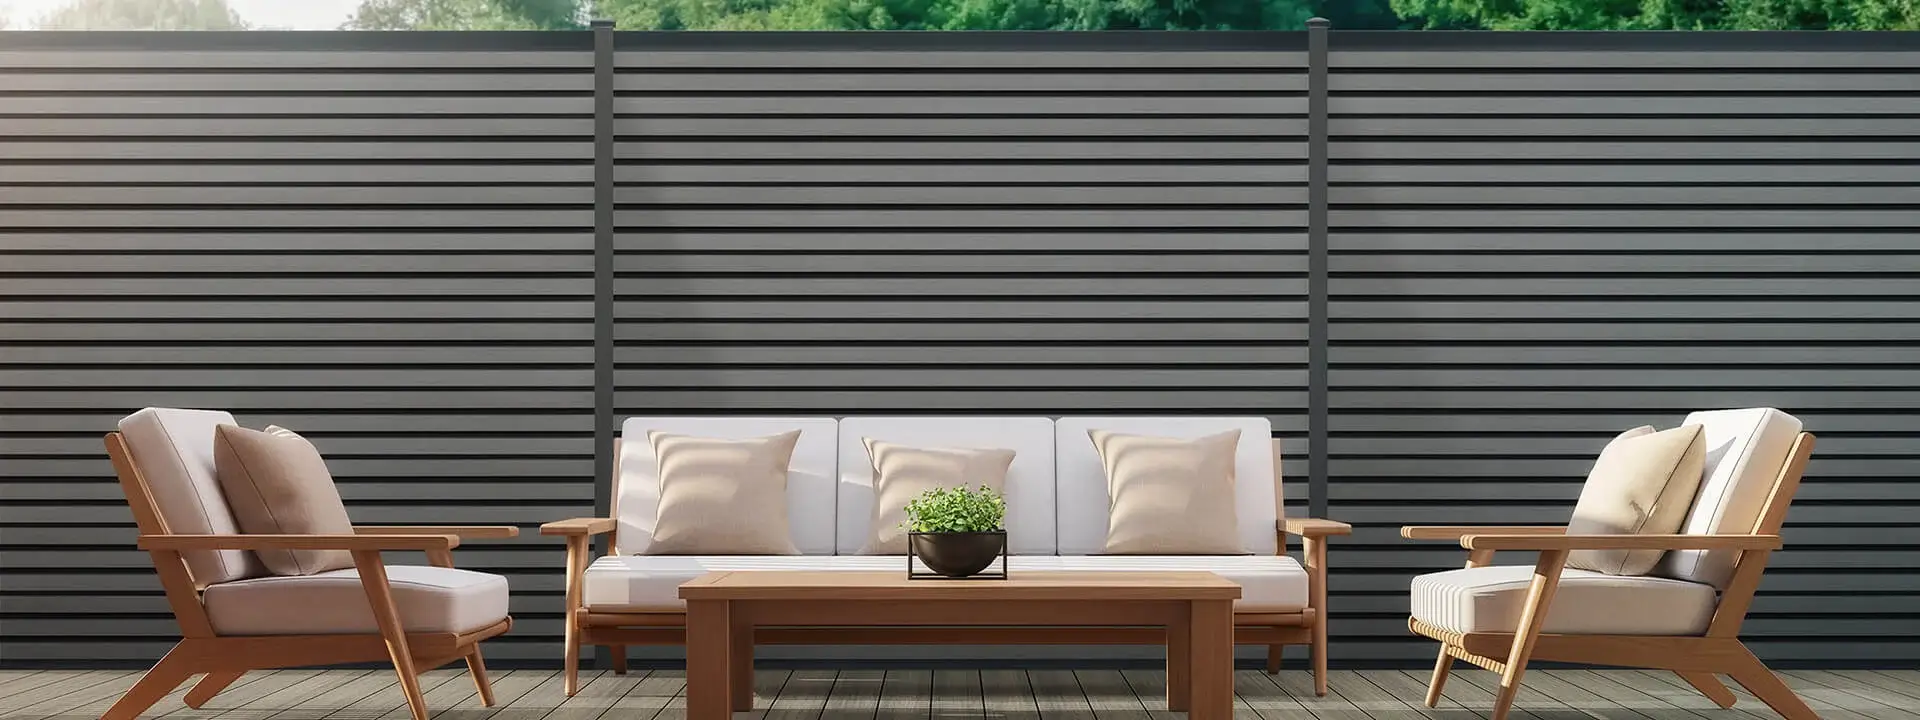 Outdoor living area with wood slats 3d render,Surrounded by the